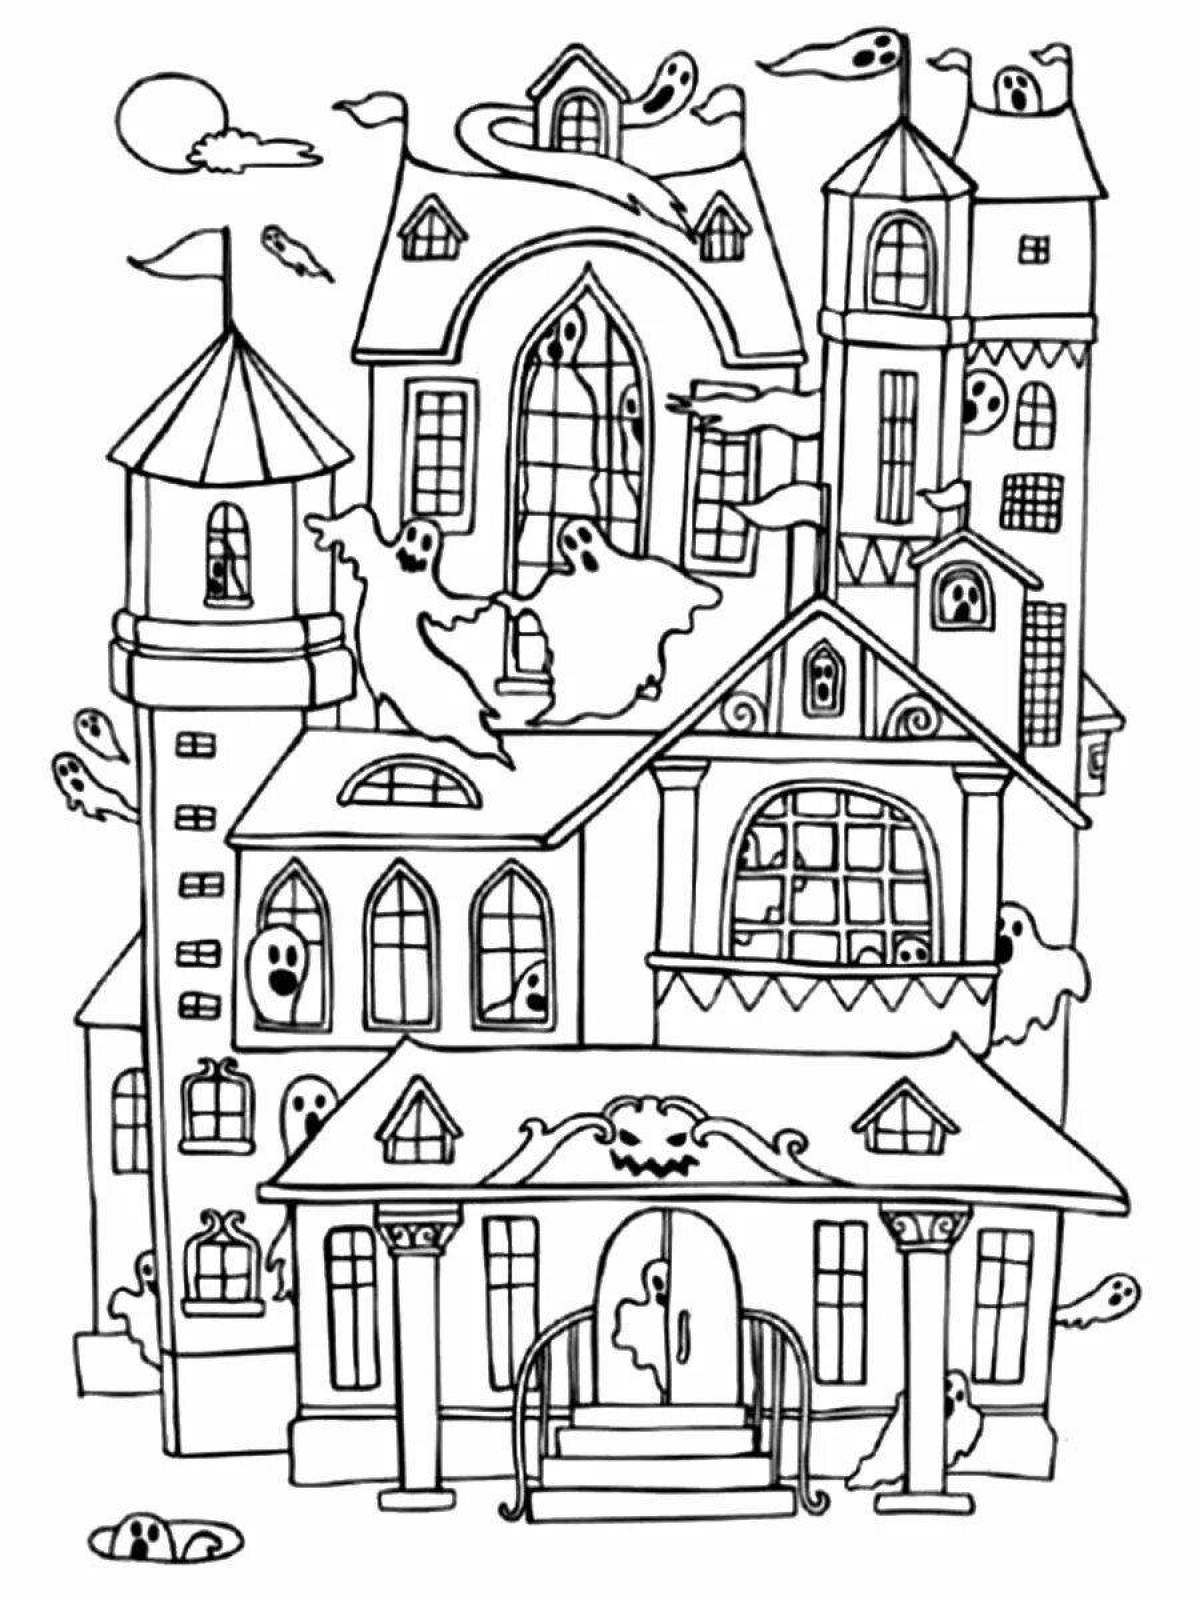 Coloring page wild beautiful house